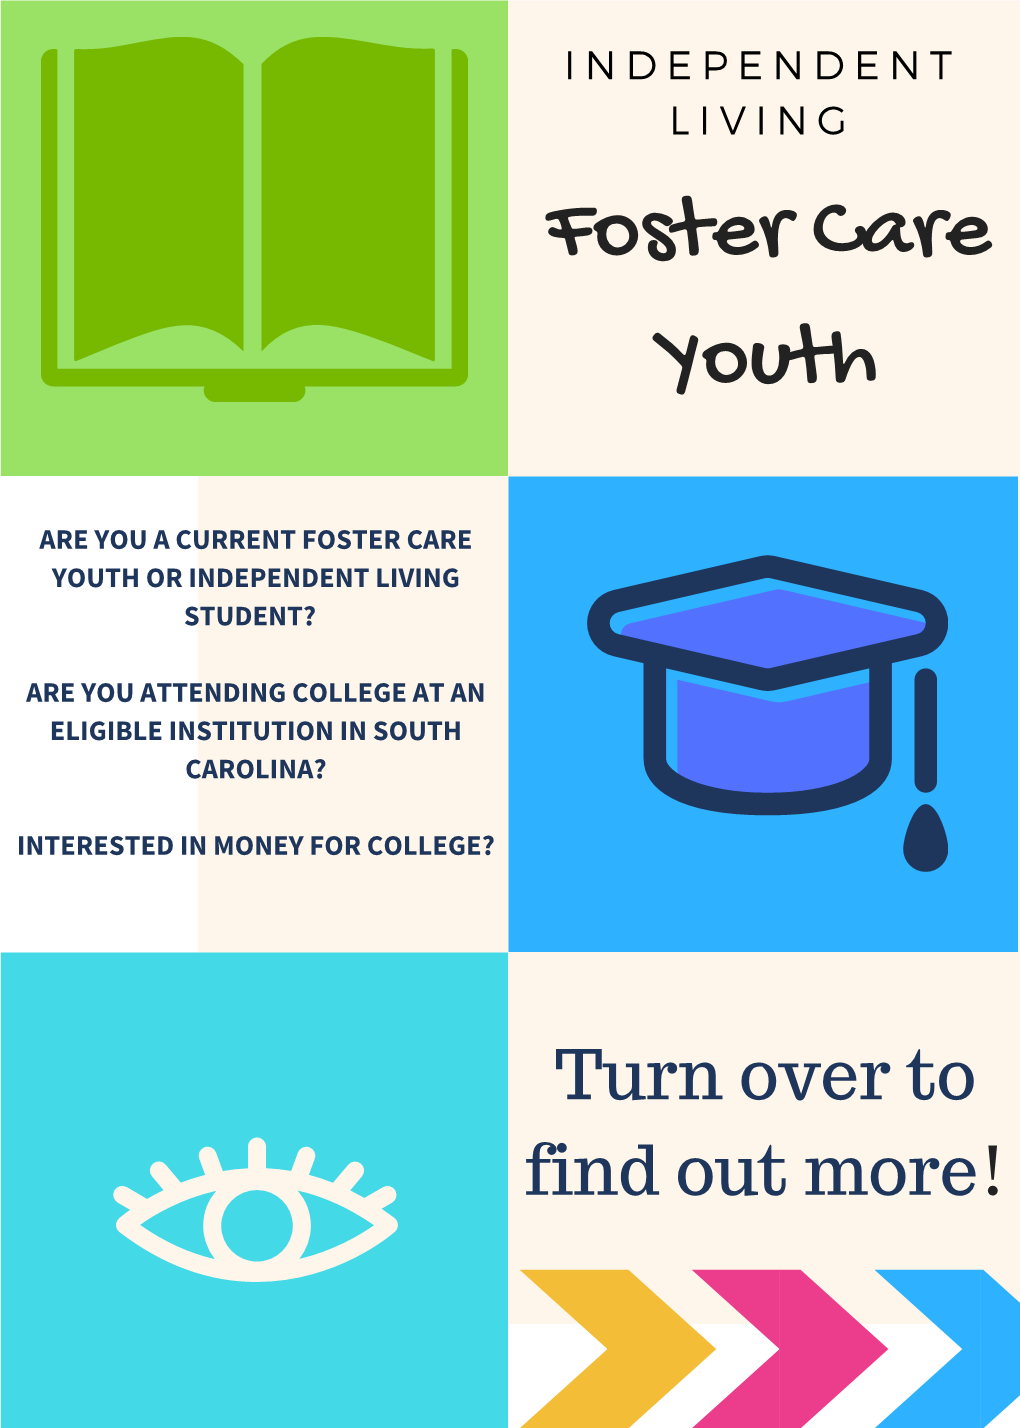 Foster Care Youth Grant